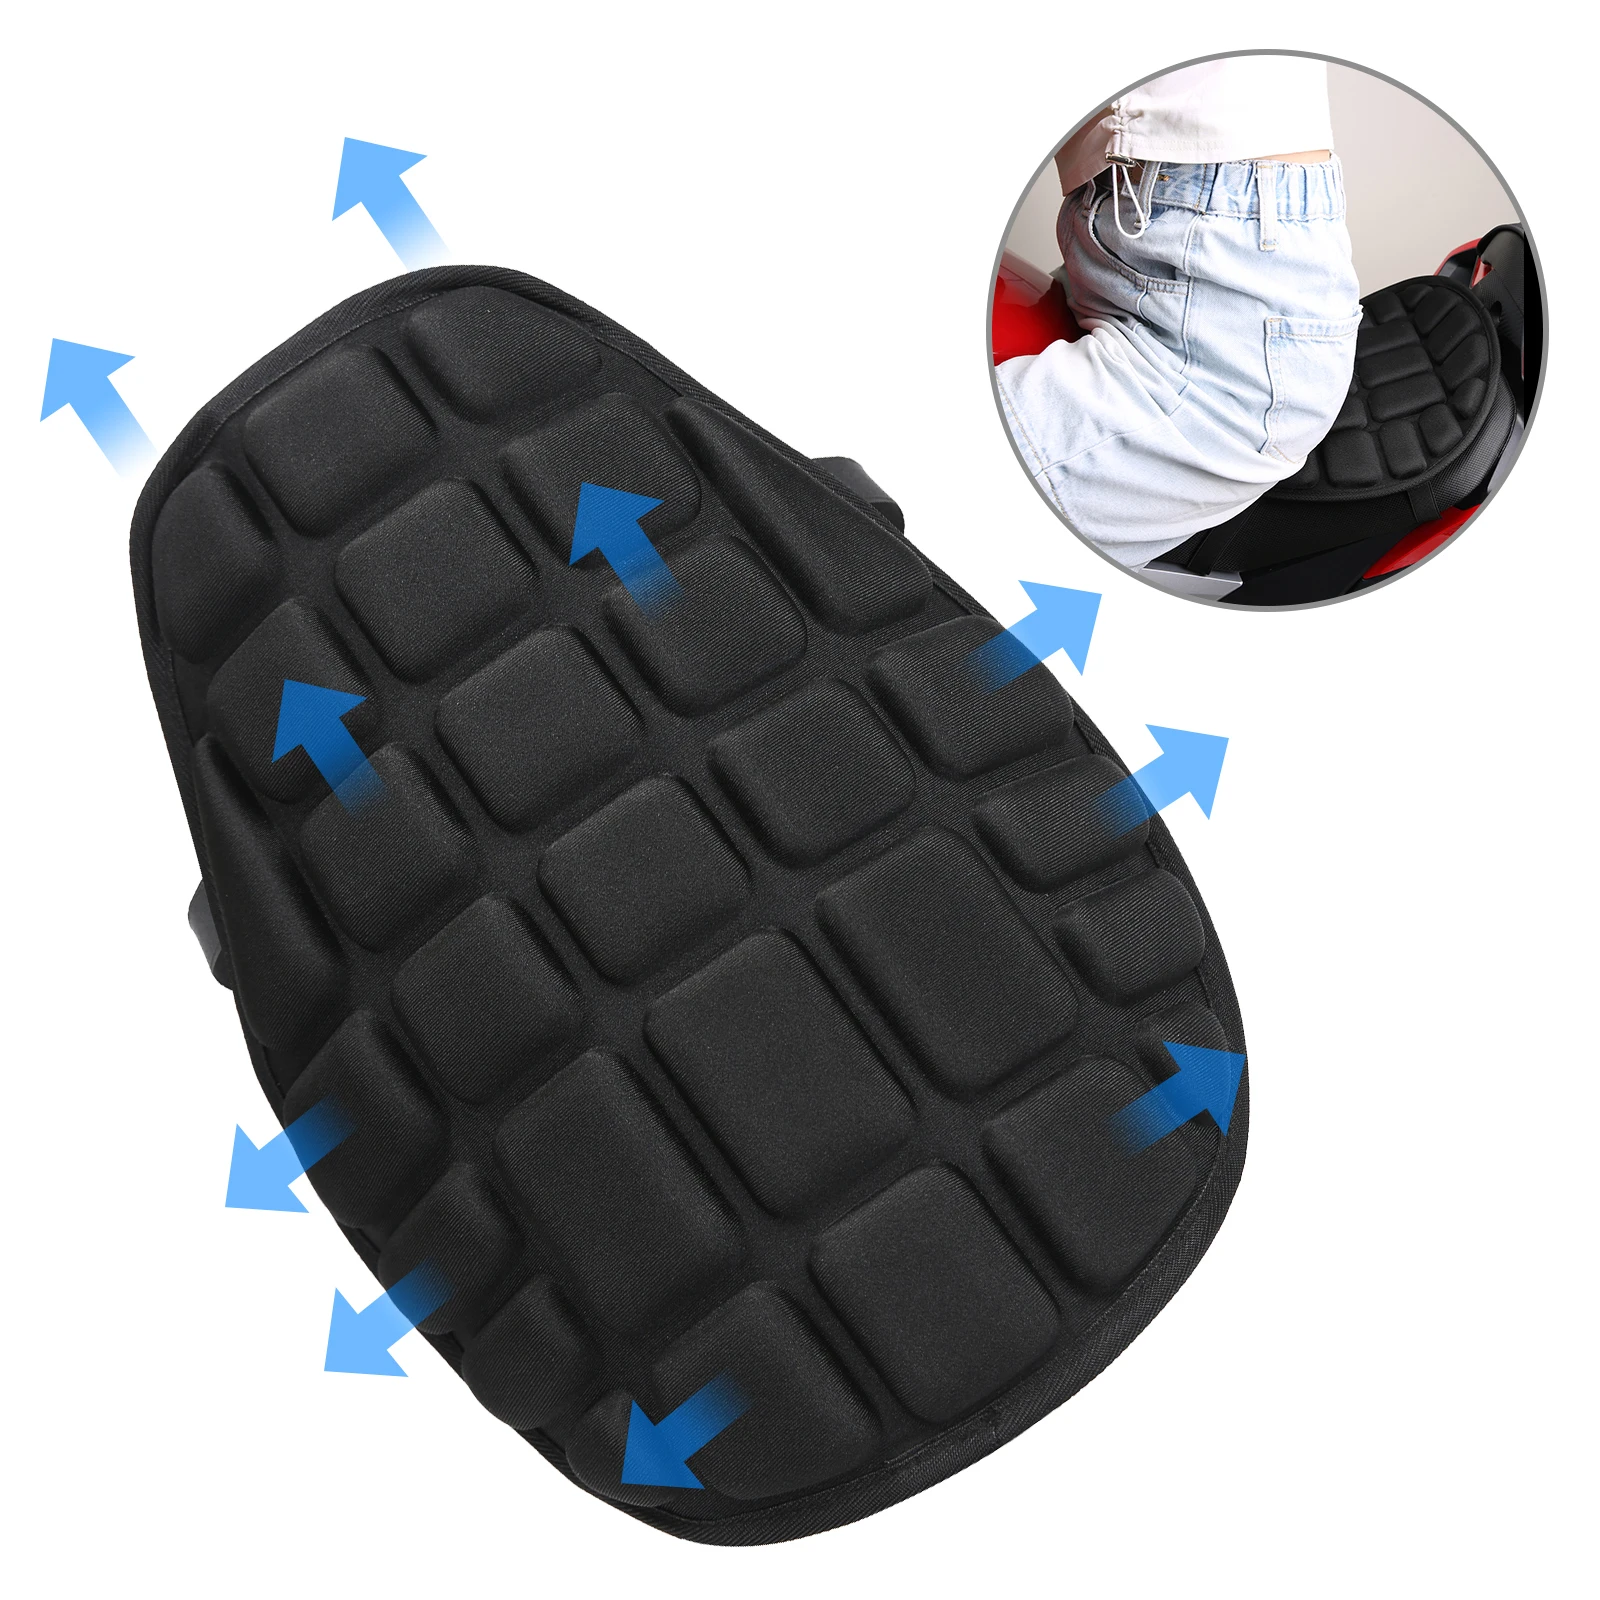 New Motorcycle Seat Cushion Cover Universal Motorcycle Foam Soft Comfortable Cushion Pressure Relief Ride Seat Pad